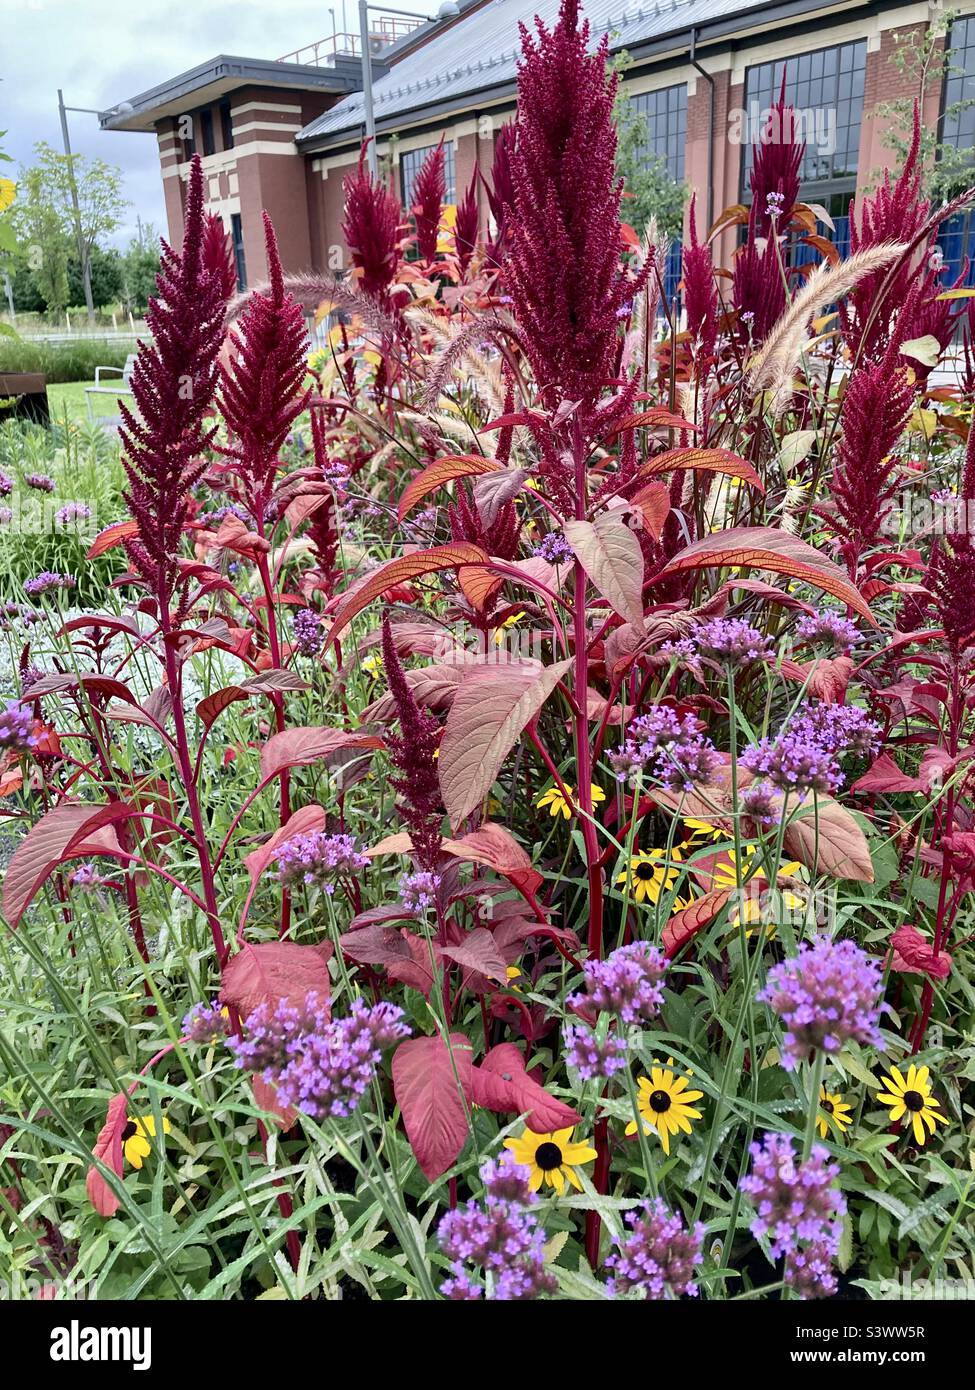 These Red Amaranth are rising above the other flowers in this garden. Stock Photo